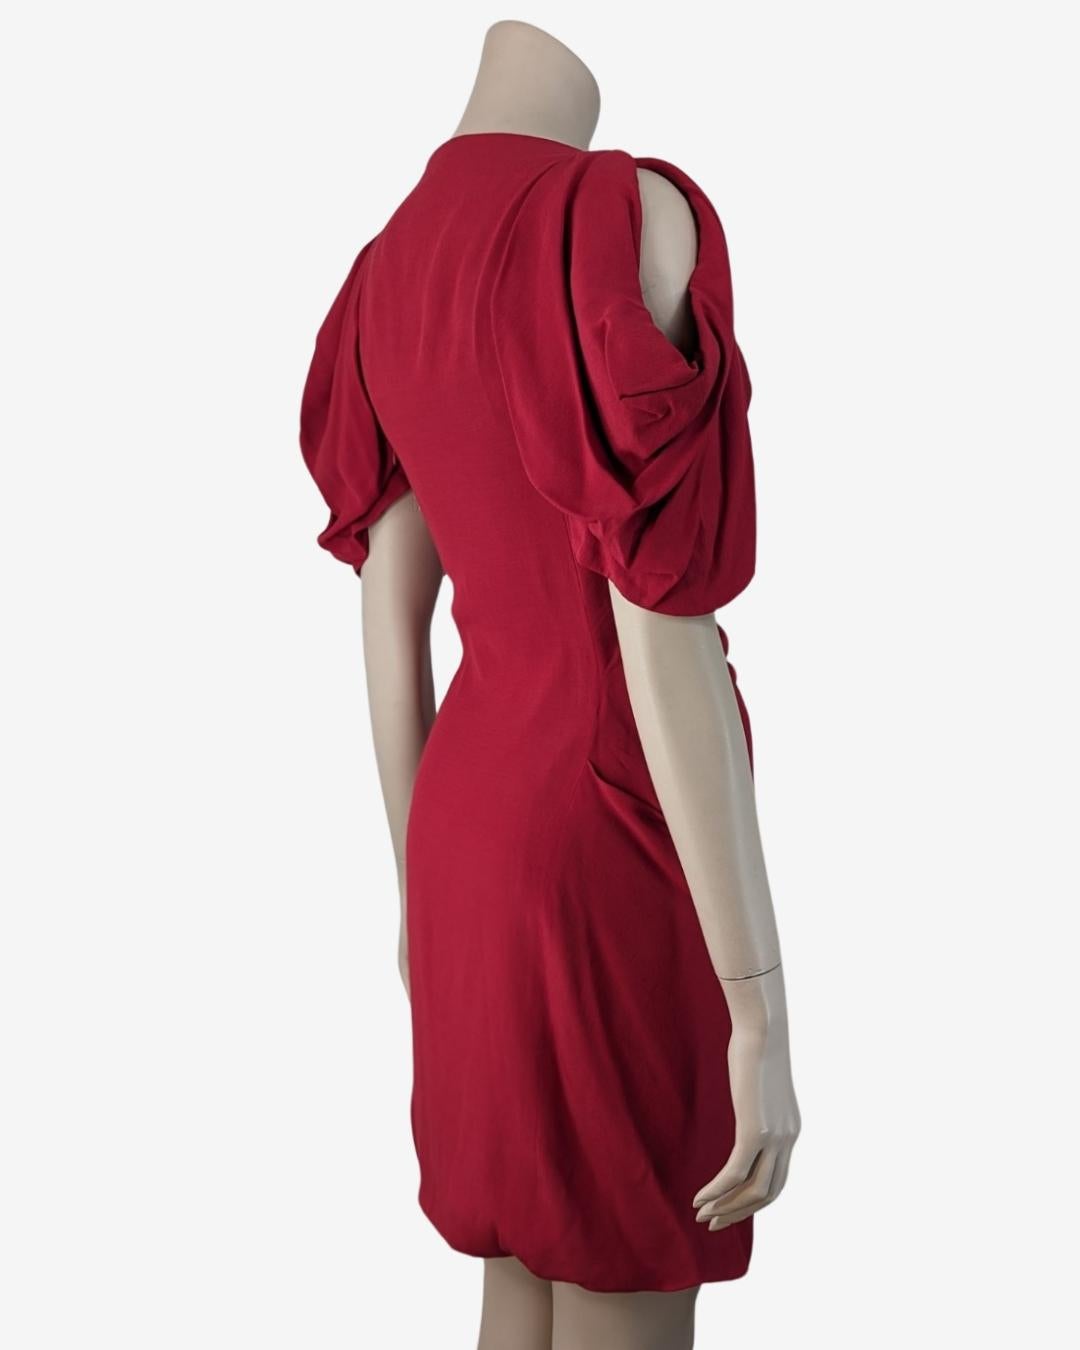 Vivienne Westwood Opened Sleeves Cherry Red Mini dress For Sale 3